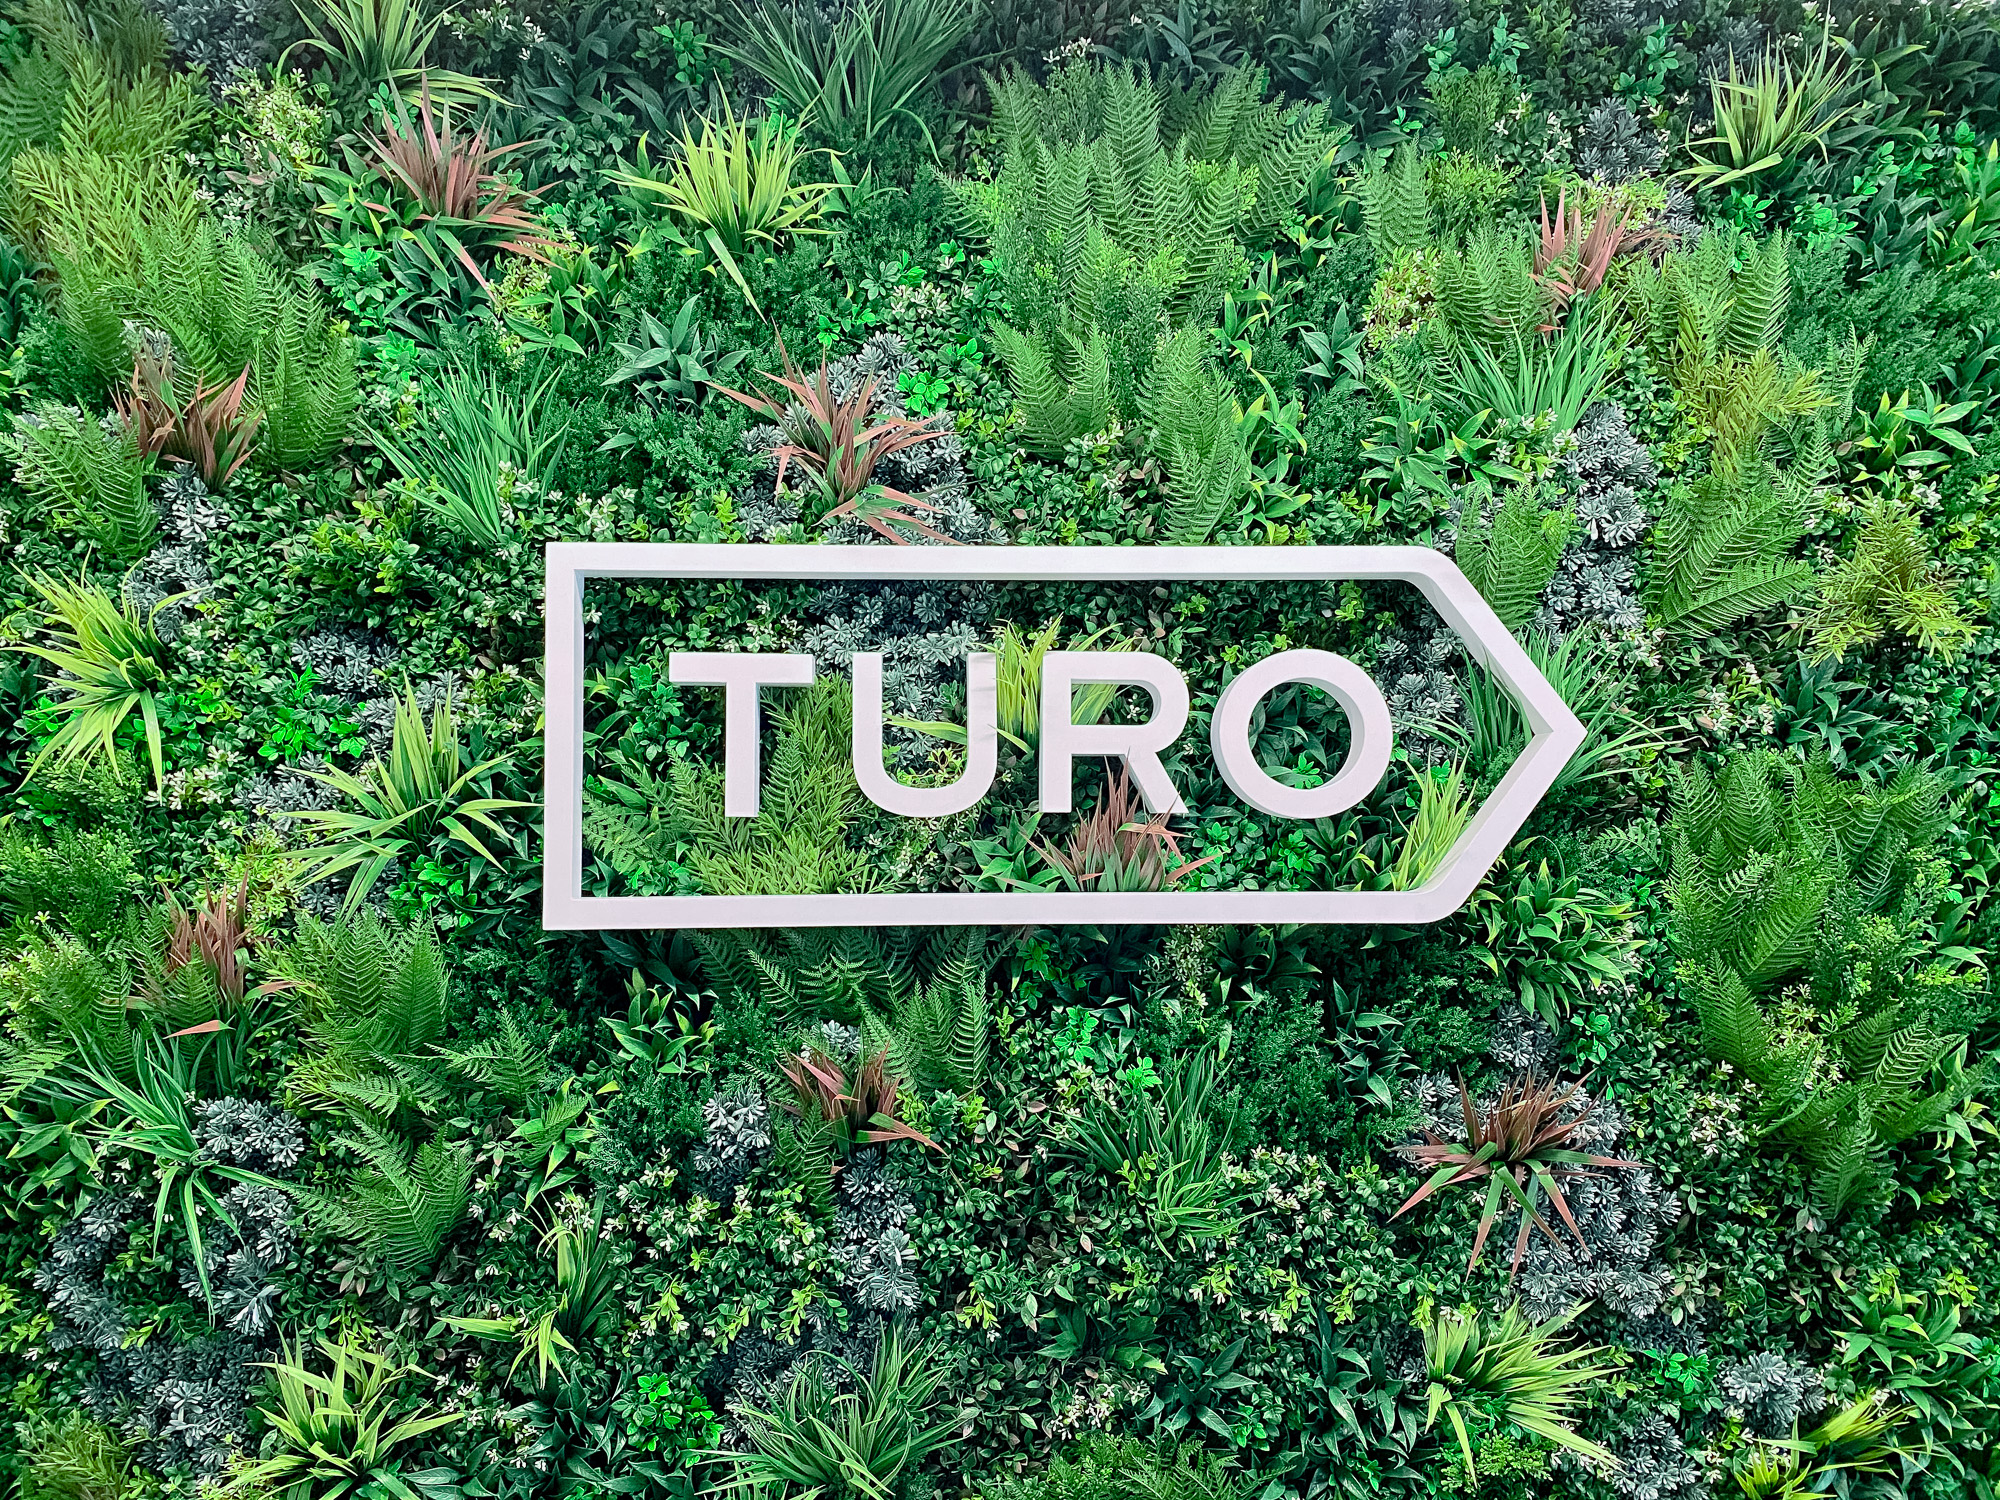 White dimensional logo on Vistagreen living wall for the lobby of Turo, an American peer-to-peer carsharing company.